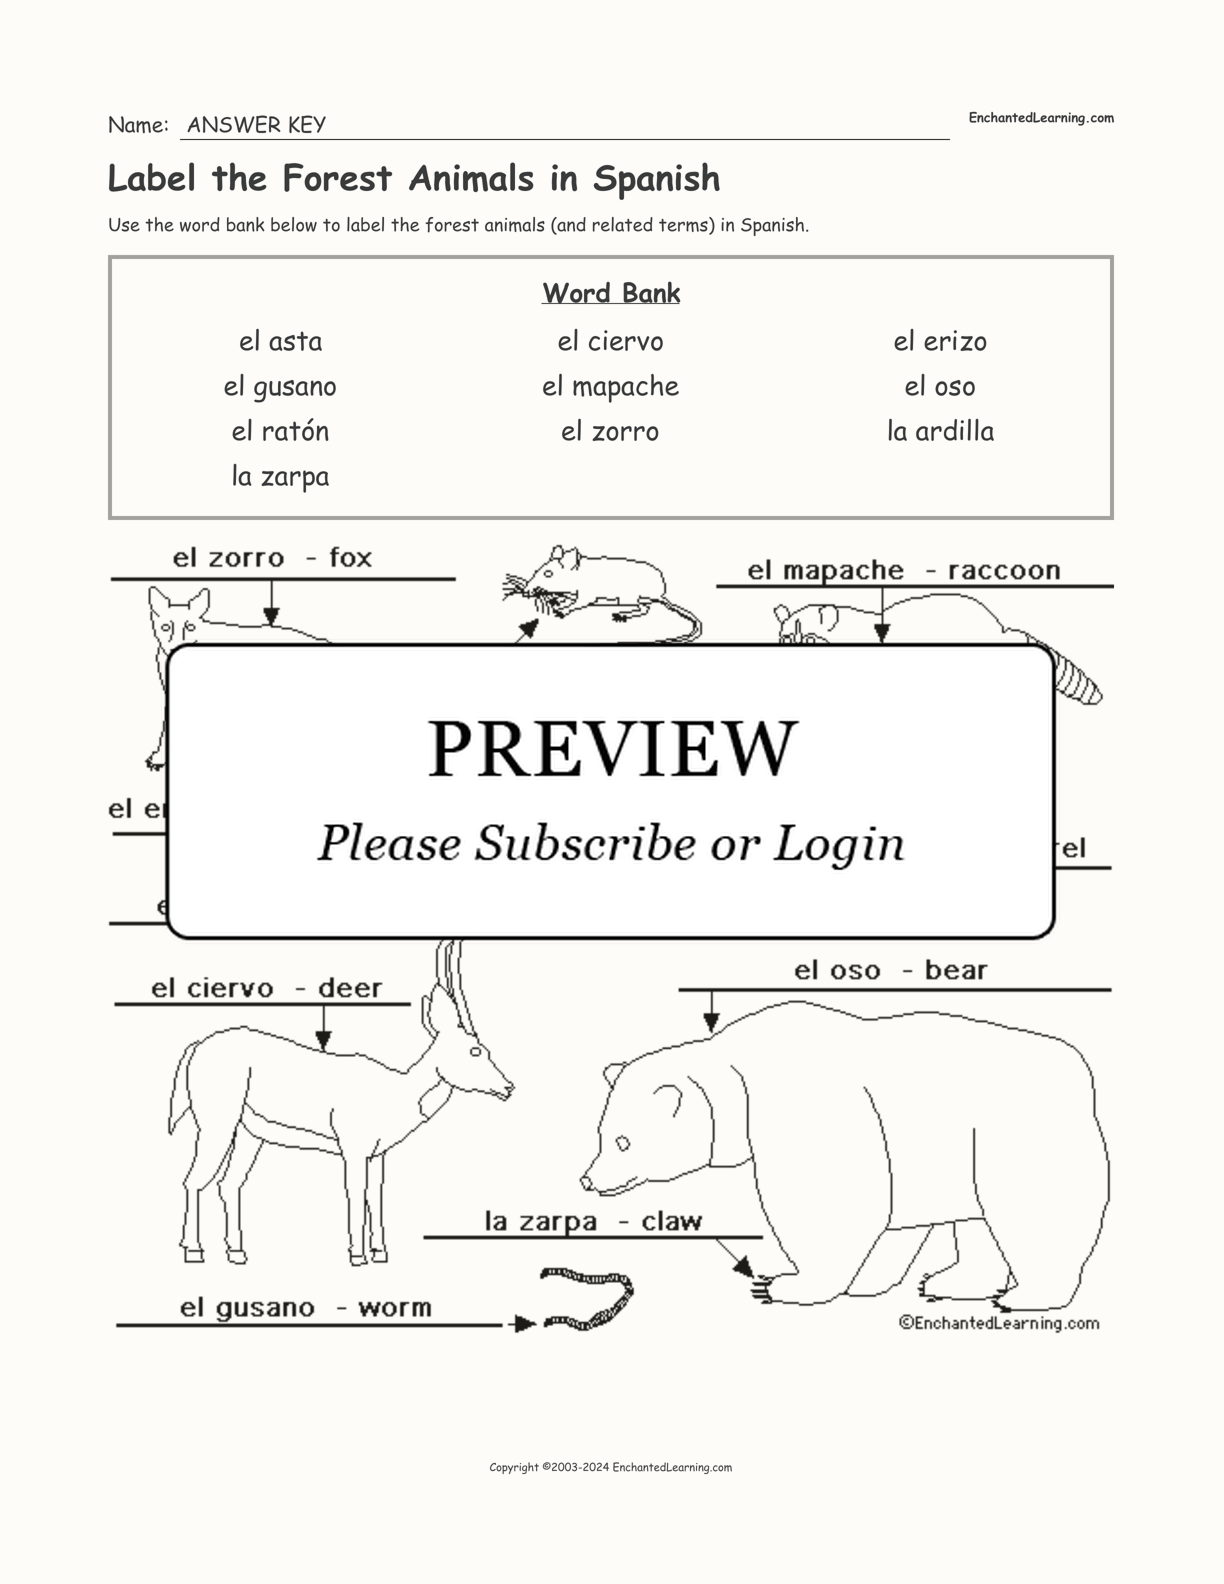 Label the Forest Animals in Spanish interactive worksheet page 2